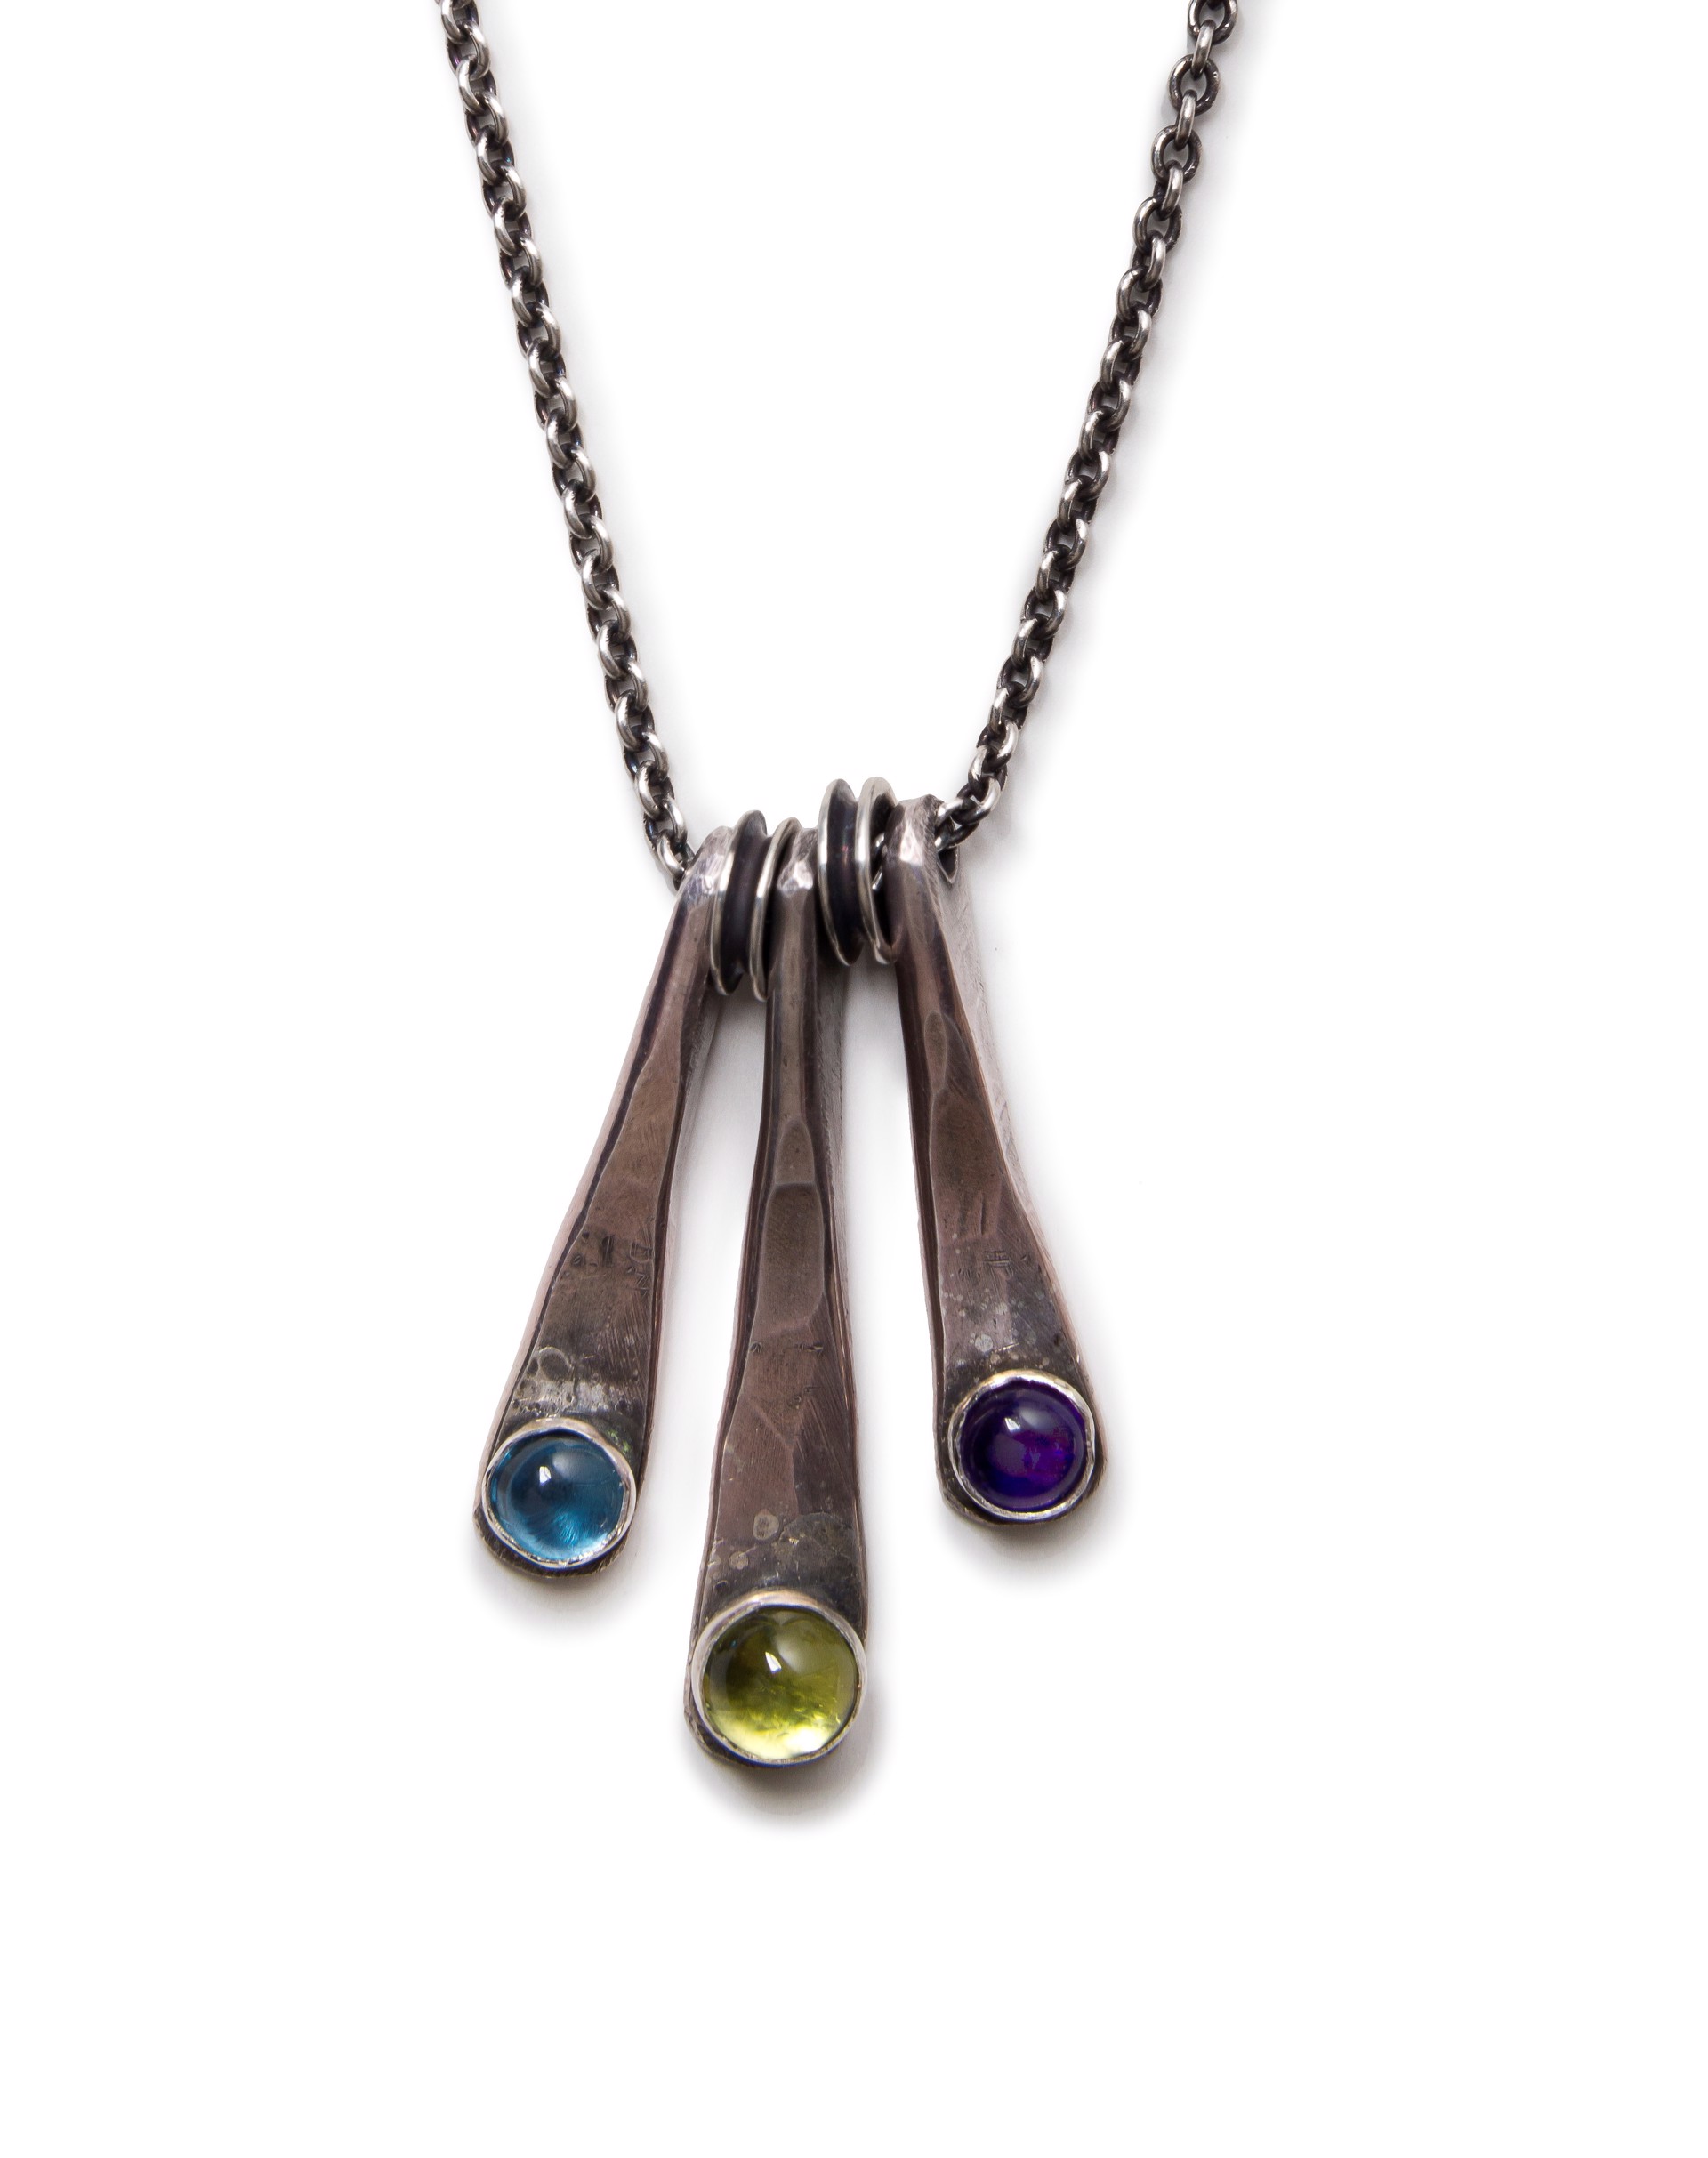 Three Wedges with Gemstones Necklace by Beth Aimee